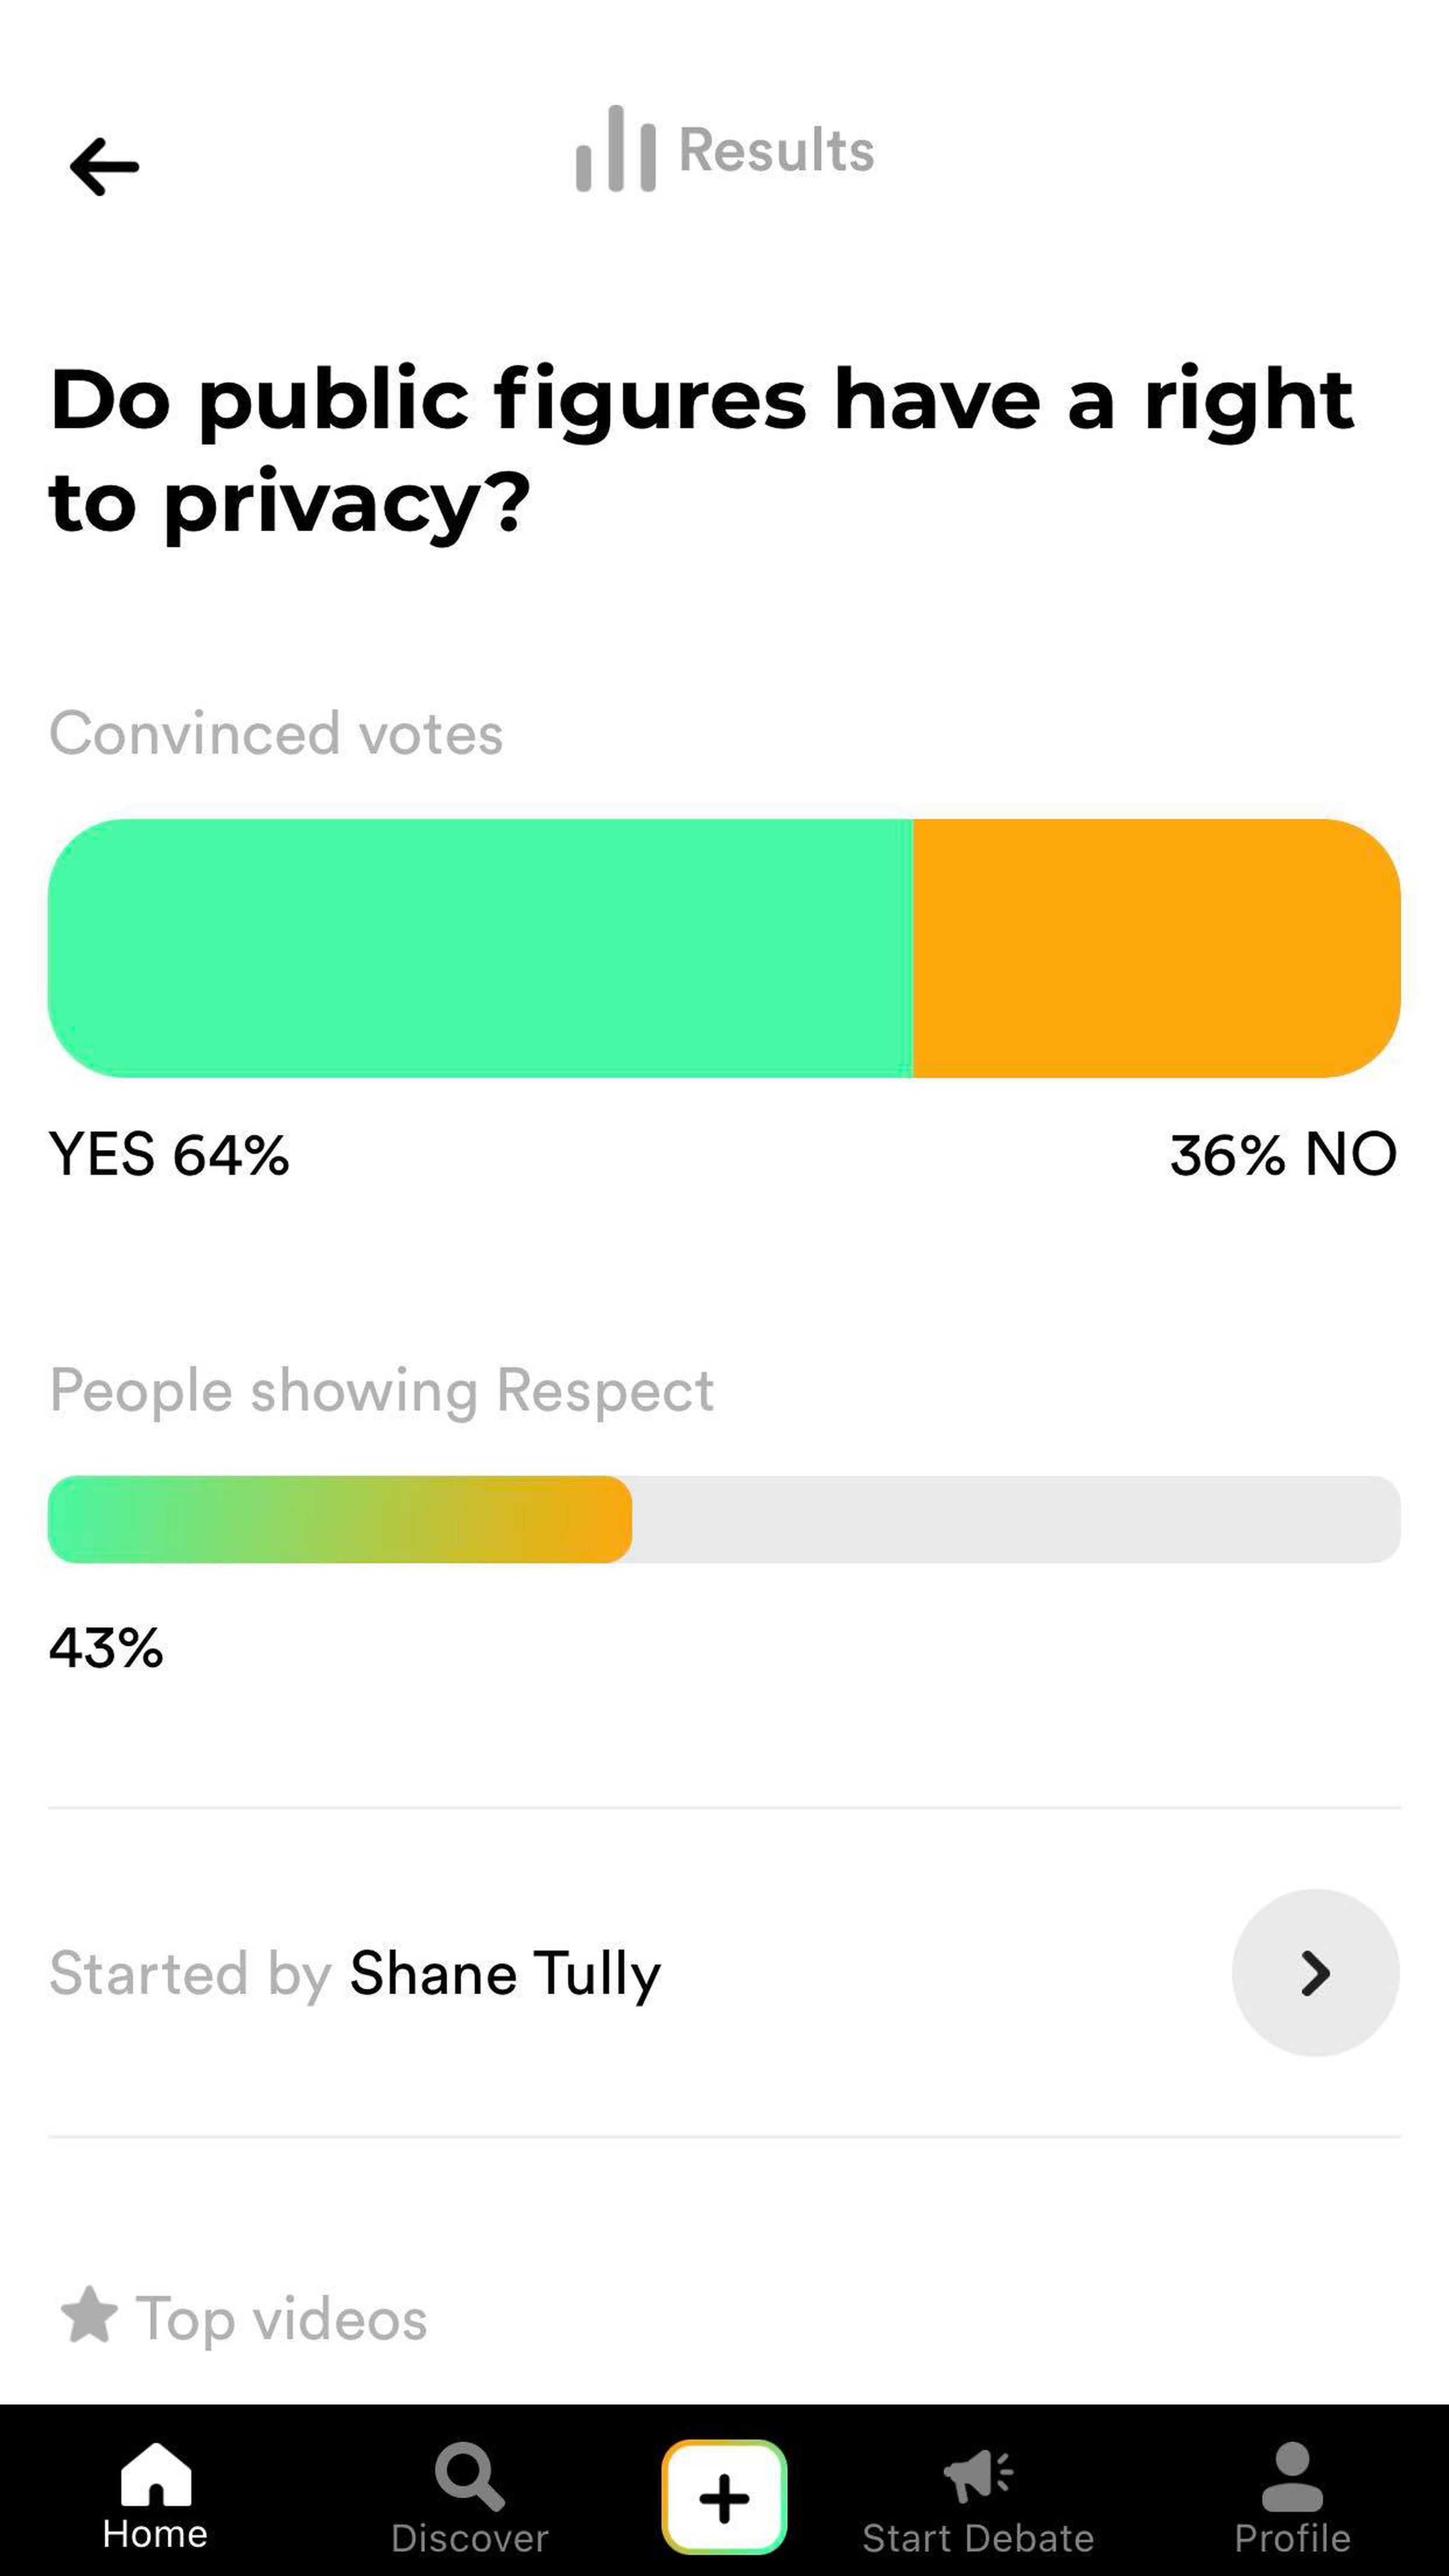 A screenshot of the statistics for a question on Polemix: “Do public figures have a right to privacy?” A graph labeled “Convinced votes” shows 64 percent Yes and 36 percent No. A graph labeled “People showing Respect” shows 43 percent Yes. Shane Tully is credited as having started the debate.